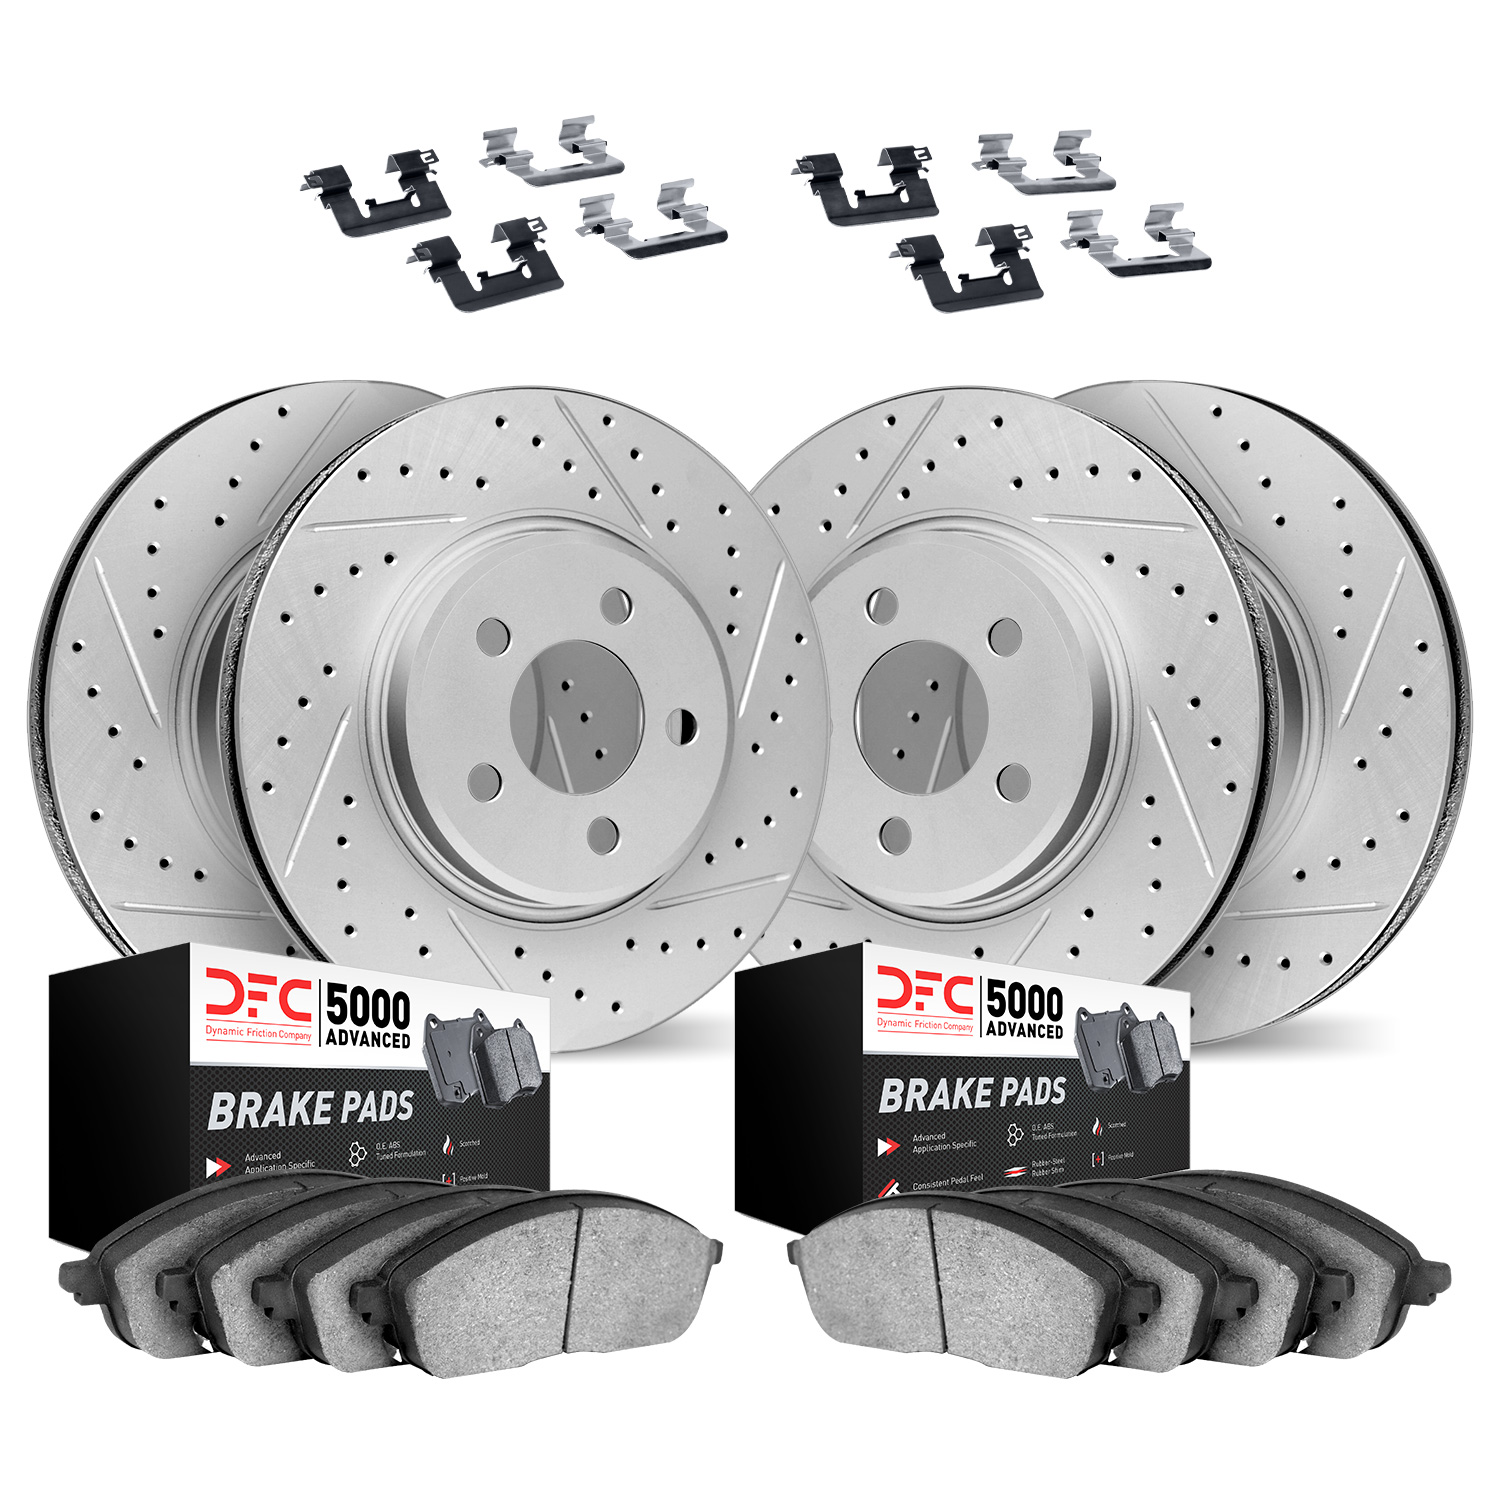 2514-65004 Geoperformance Drilled/Slotted Rotors w/5000 Advanced Brake Pads Kit & Hardware, 2003-2003 GM, Position: Front and Re